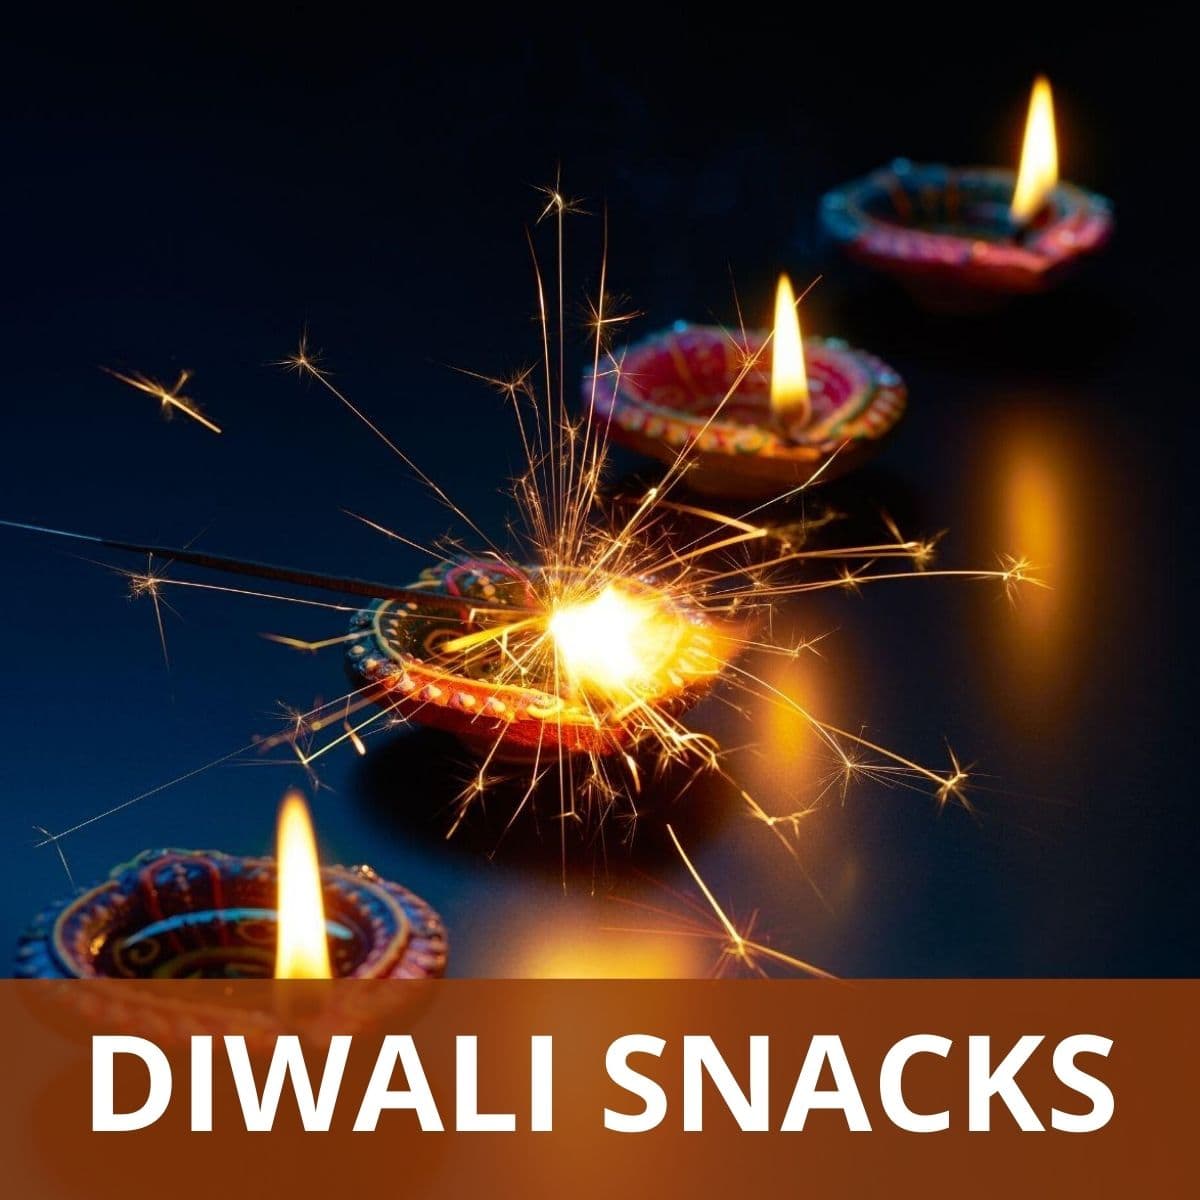 4 diyas in a line with text 'Diwali snacks' on the image